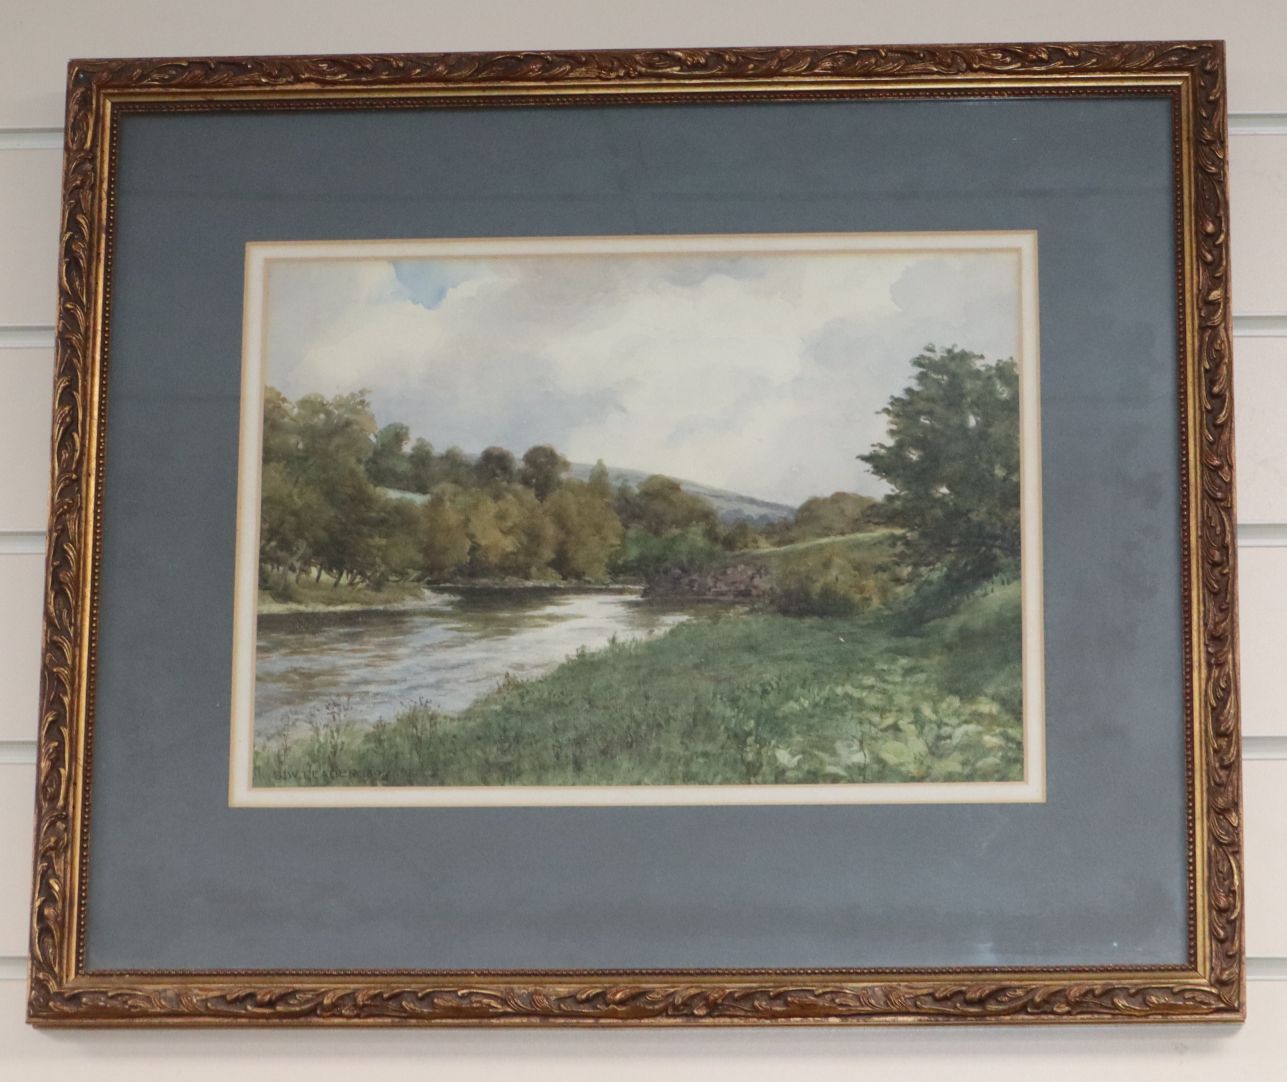 Benjamin Williams Leader, pair of watercolours, River landscapes, signed and dated 1904, 25 x 35cm